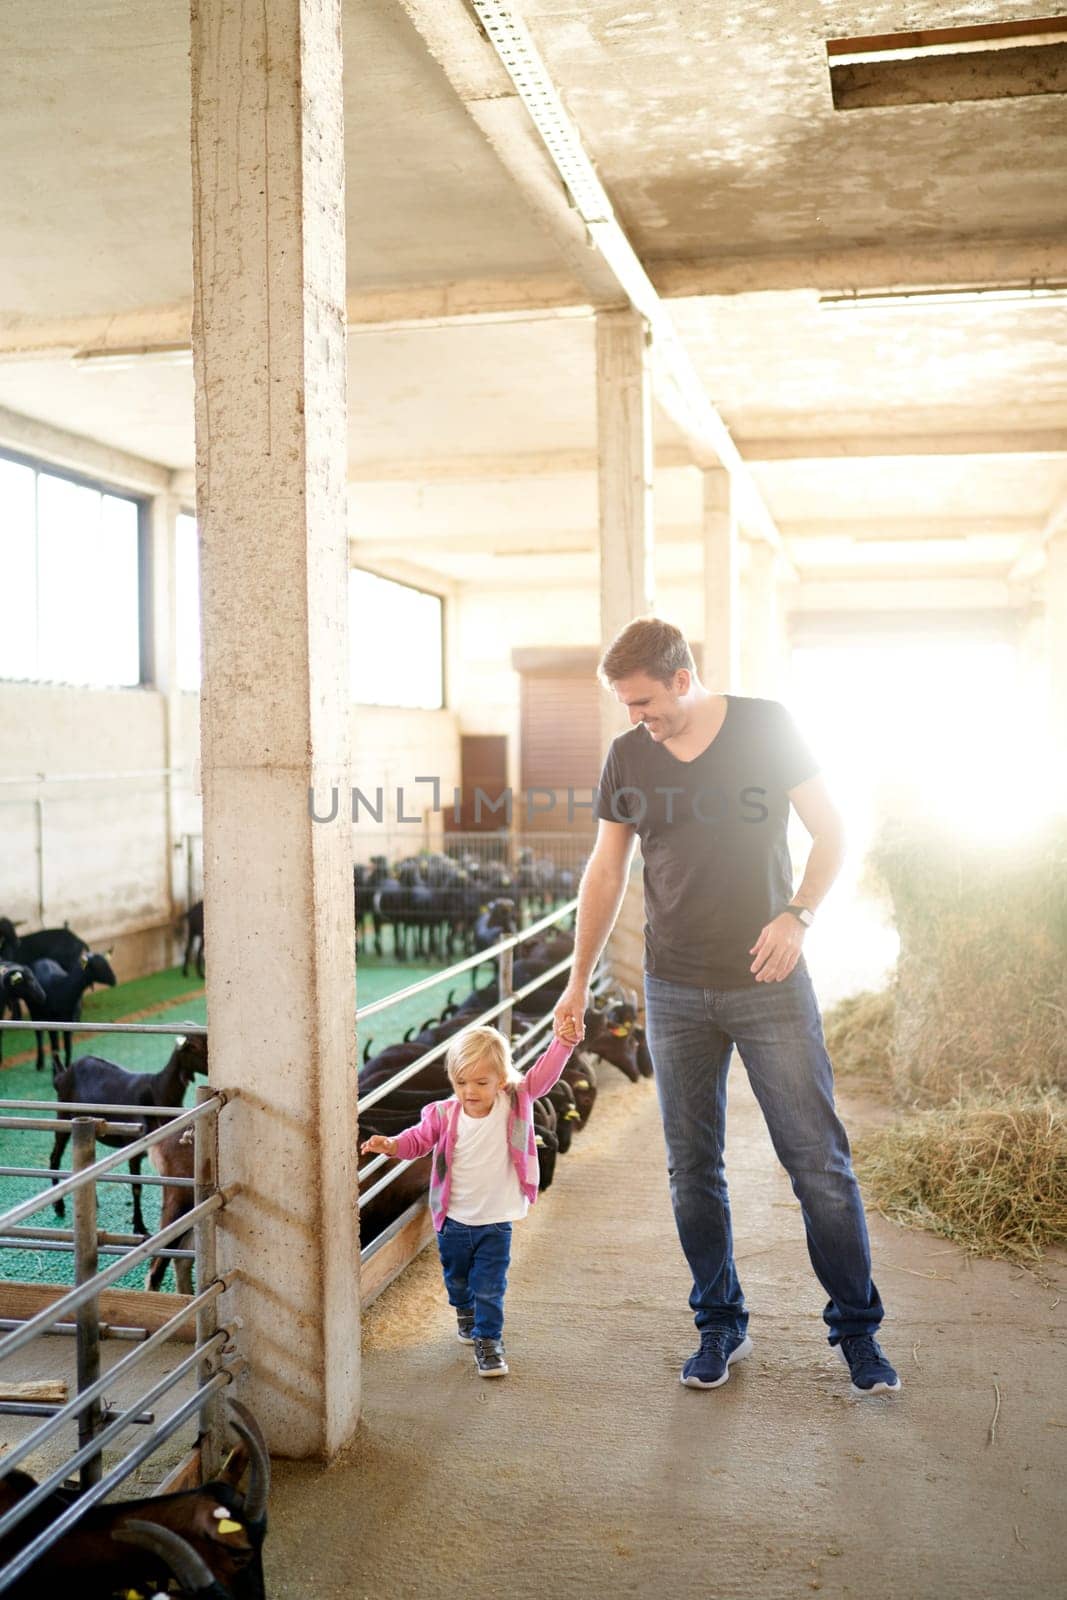 Dad and a little girl walk holding hands through a farm past eating goats. High quality photo